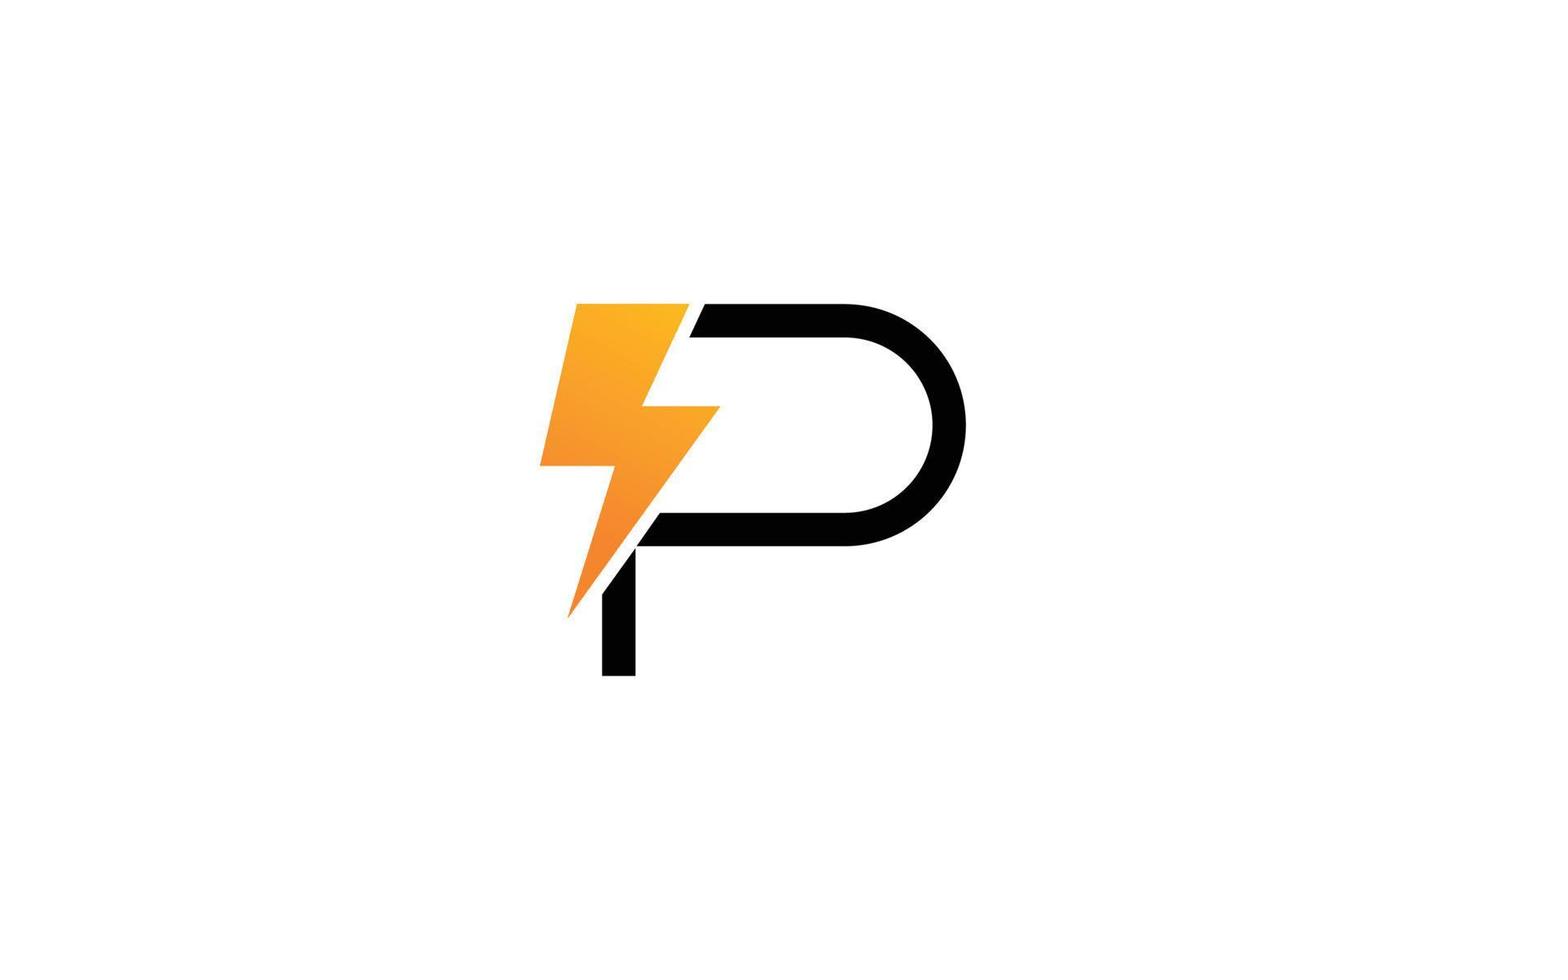 P logo energy vector for identity company. initial letter volt template vector illustration for your brand.